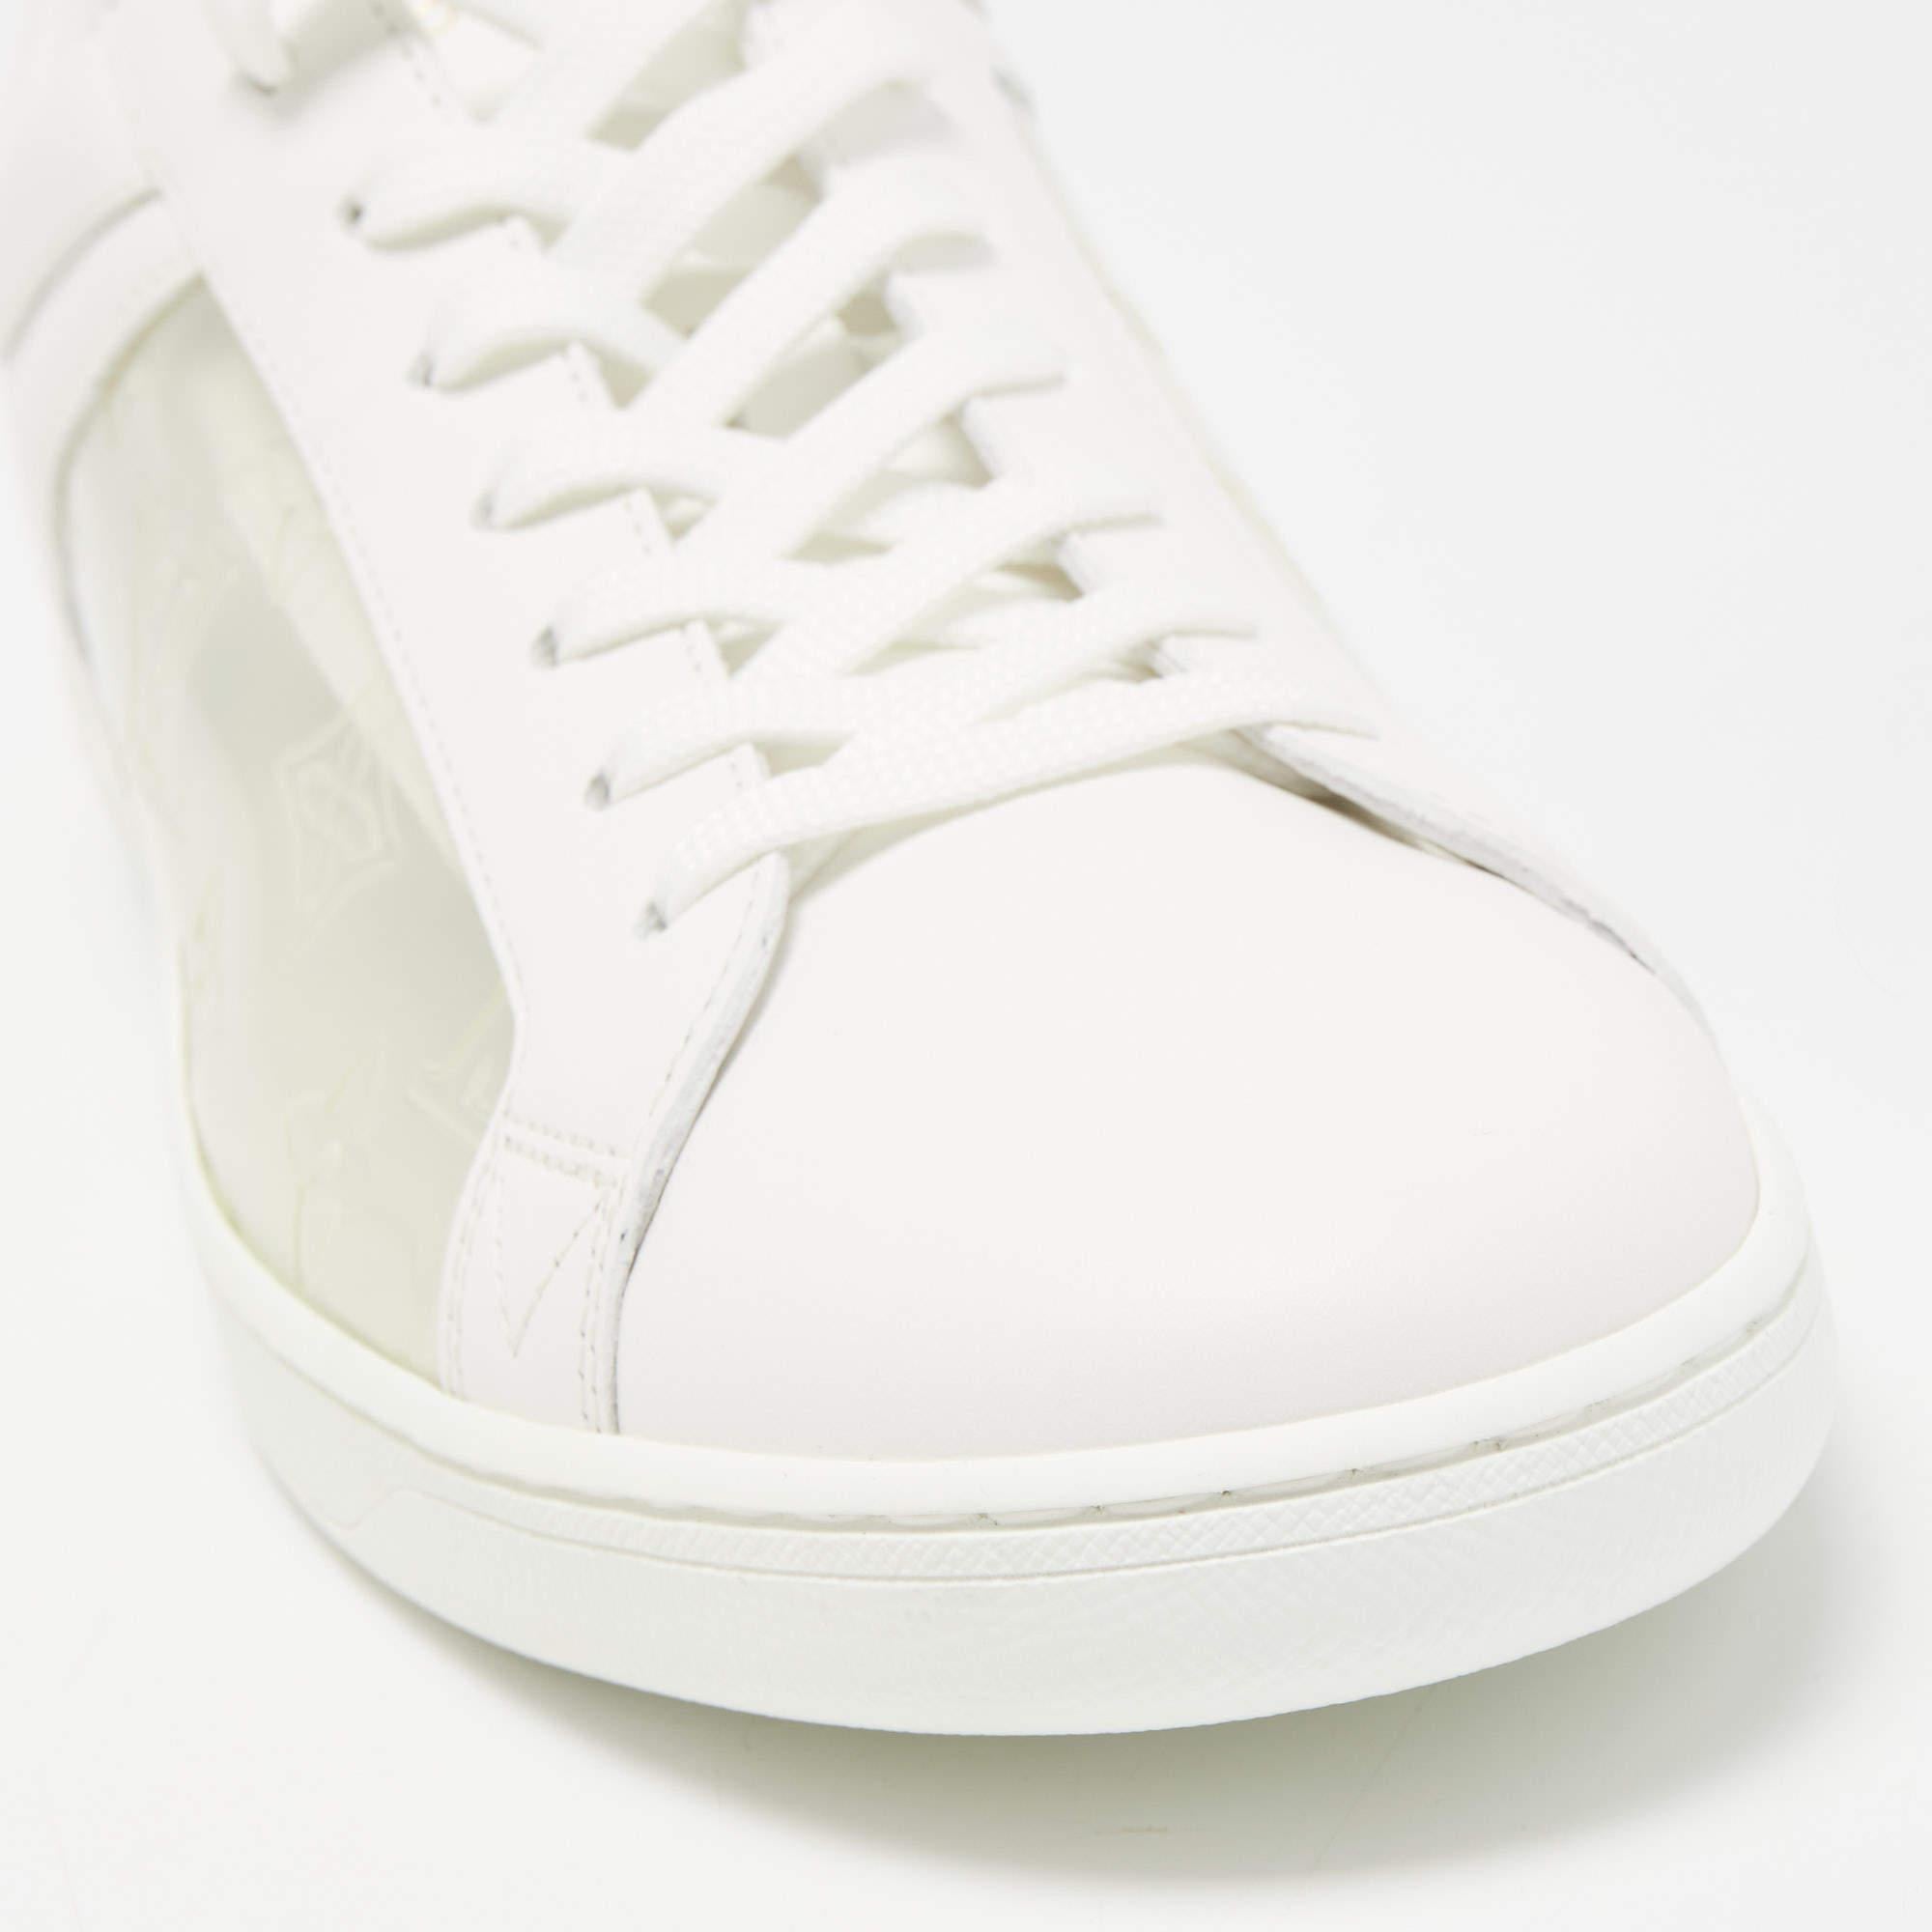 Coming in a classic silhouette, these designer sneakers are a seamless combination of luxury, comfort, and style. These sneakers are designed with signature details and comfortable insoles.

Includes: Original Dustbag, Original Box, Extra Lace